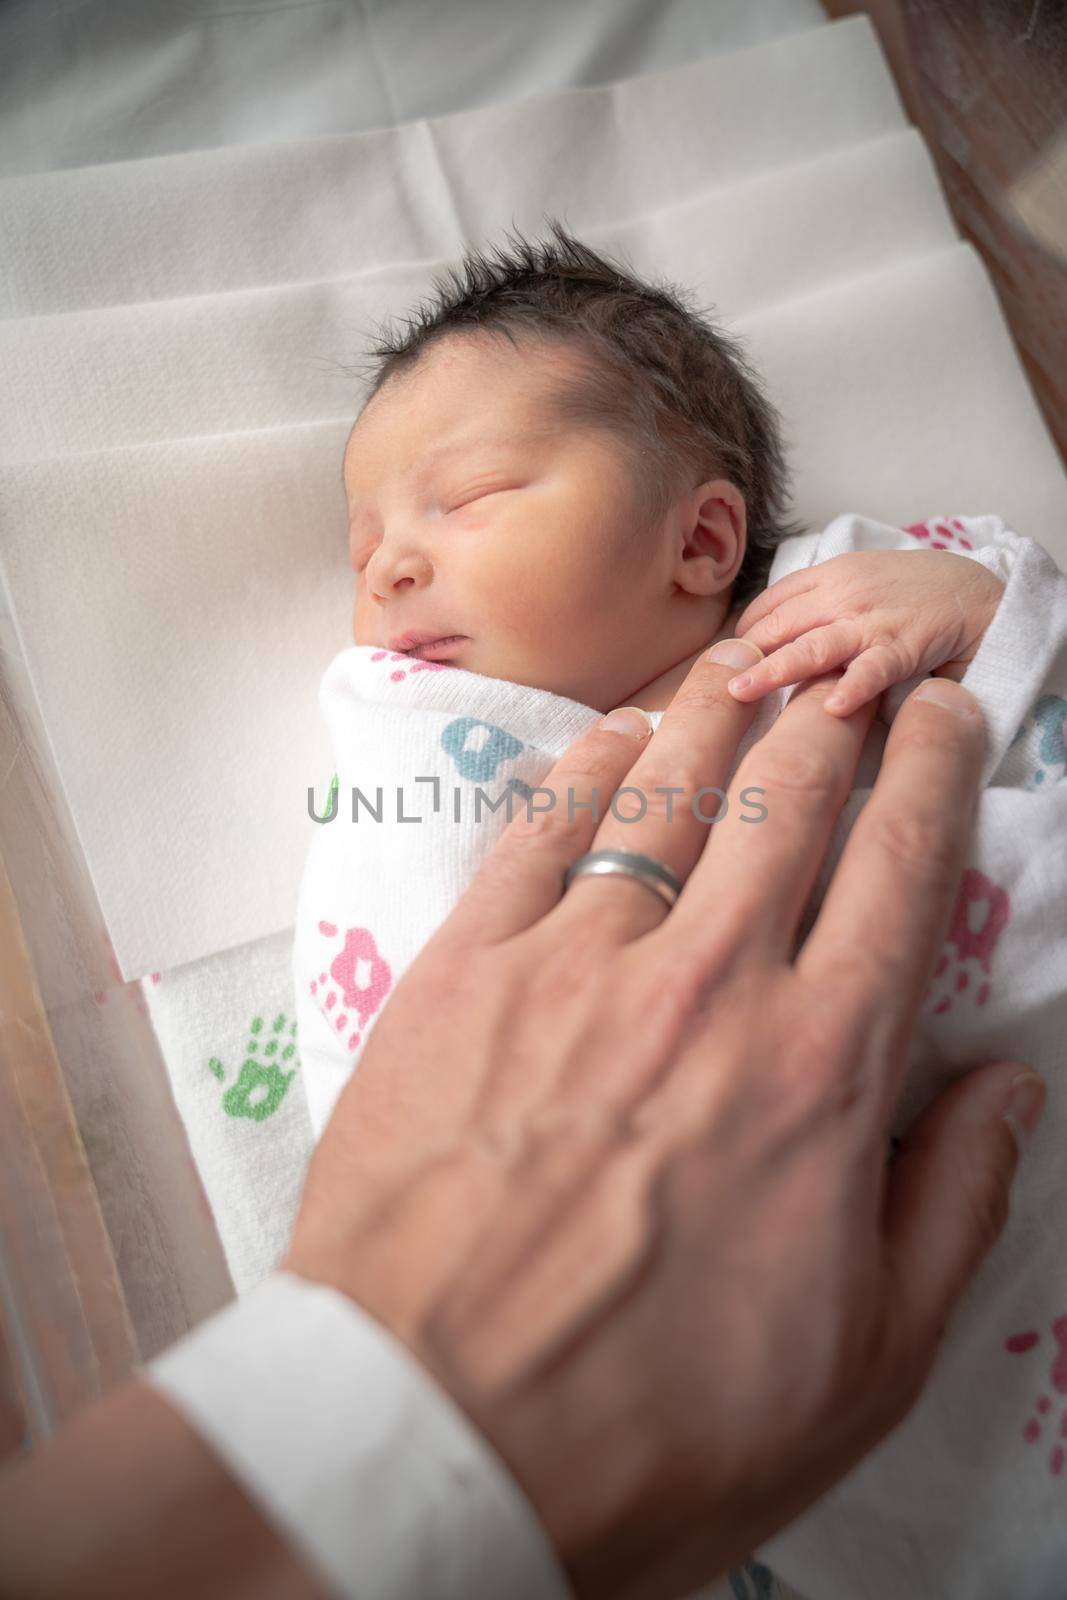 A newborn infant baby girl in a blanket swaddle rests her tiny hand and fingers on her fathers wrinkled hand as she sleeps peacefully.